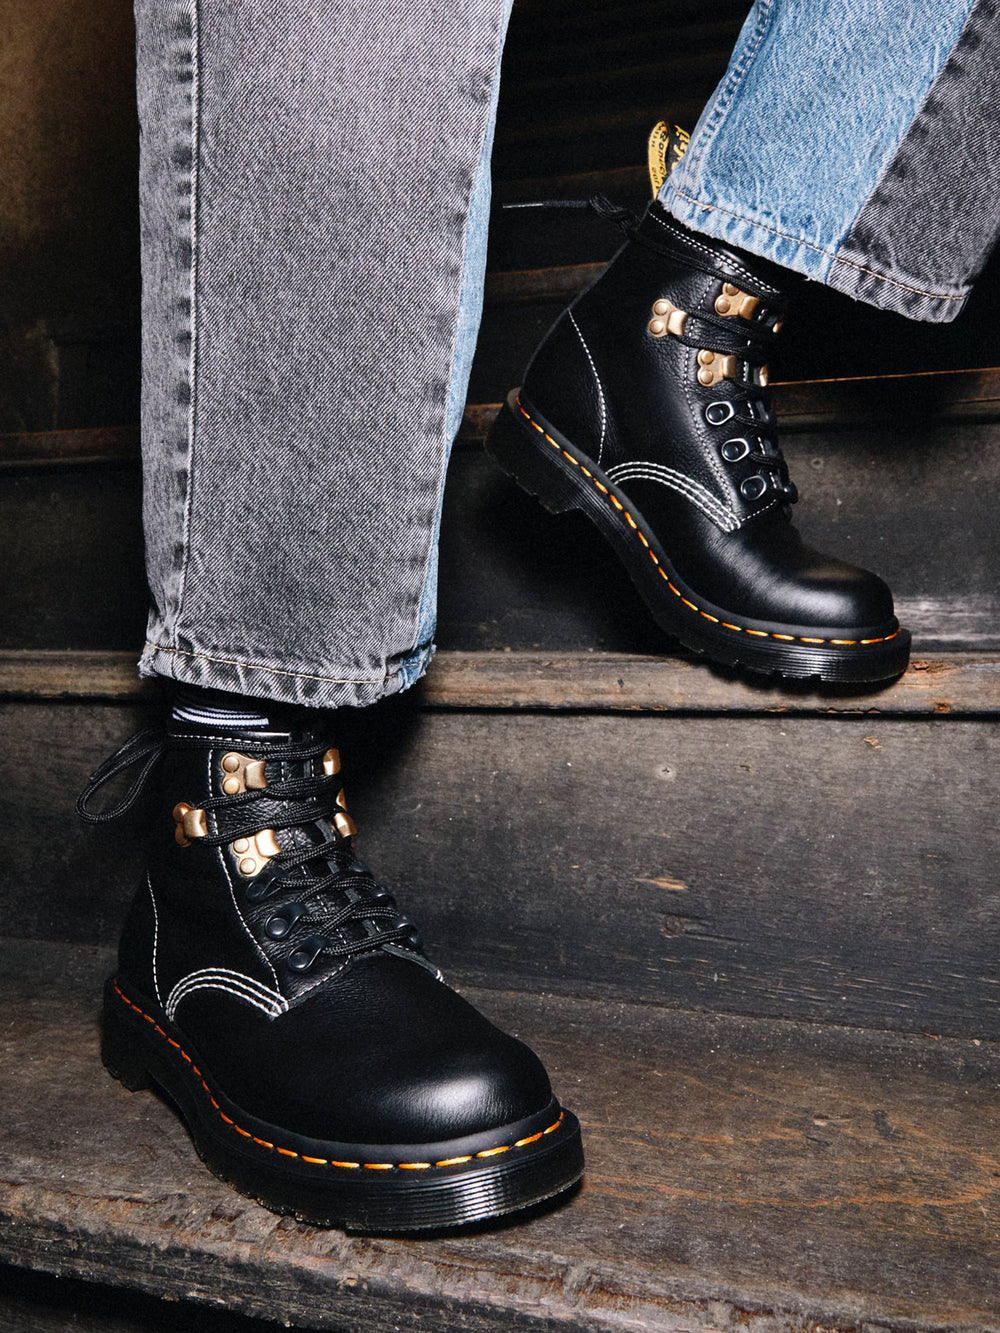 WOMENS DR MARTENS 101HWD BOOT - CLEARANCE